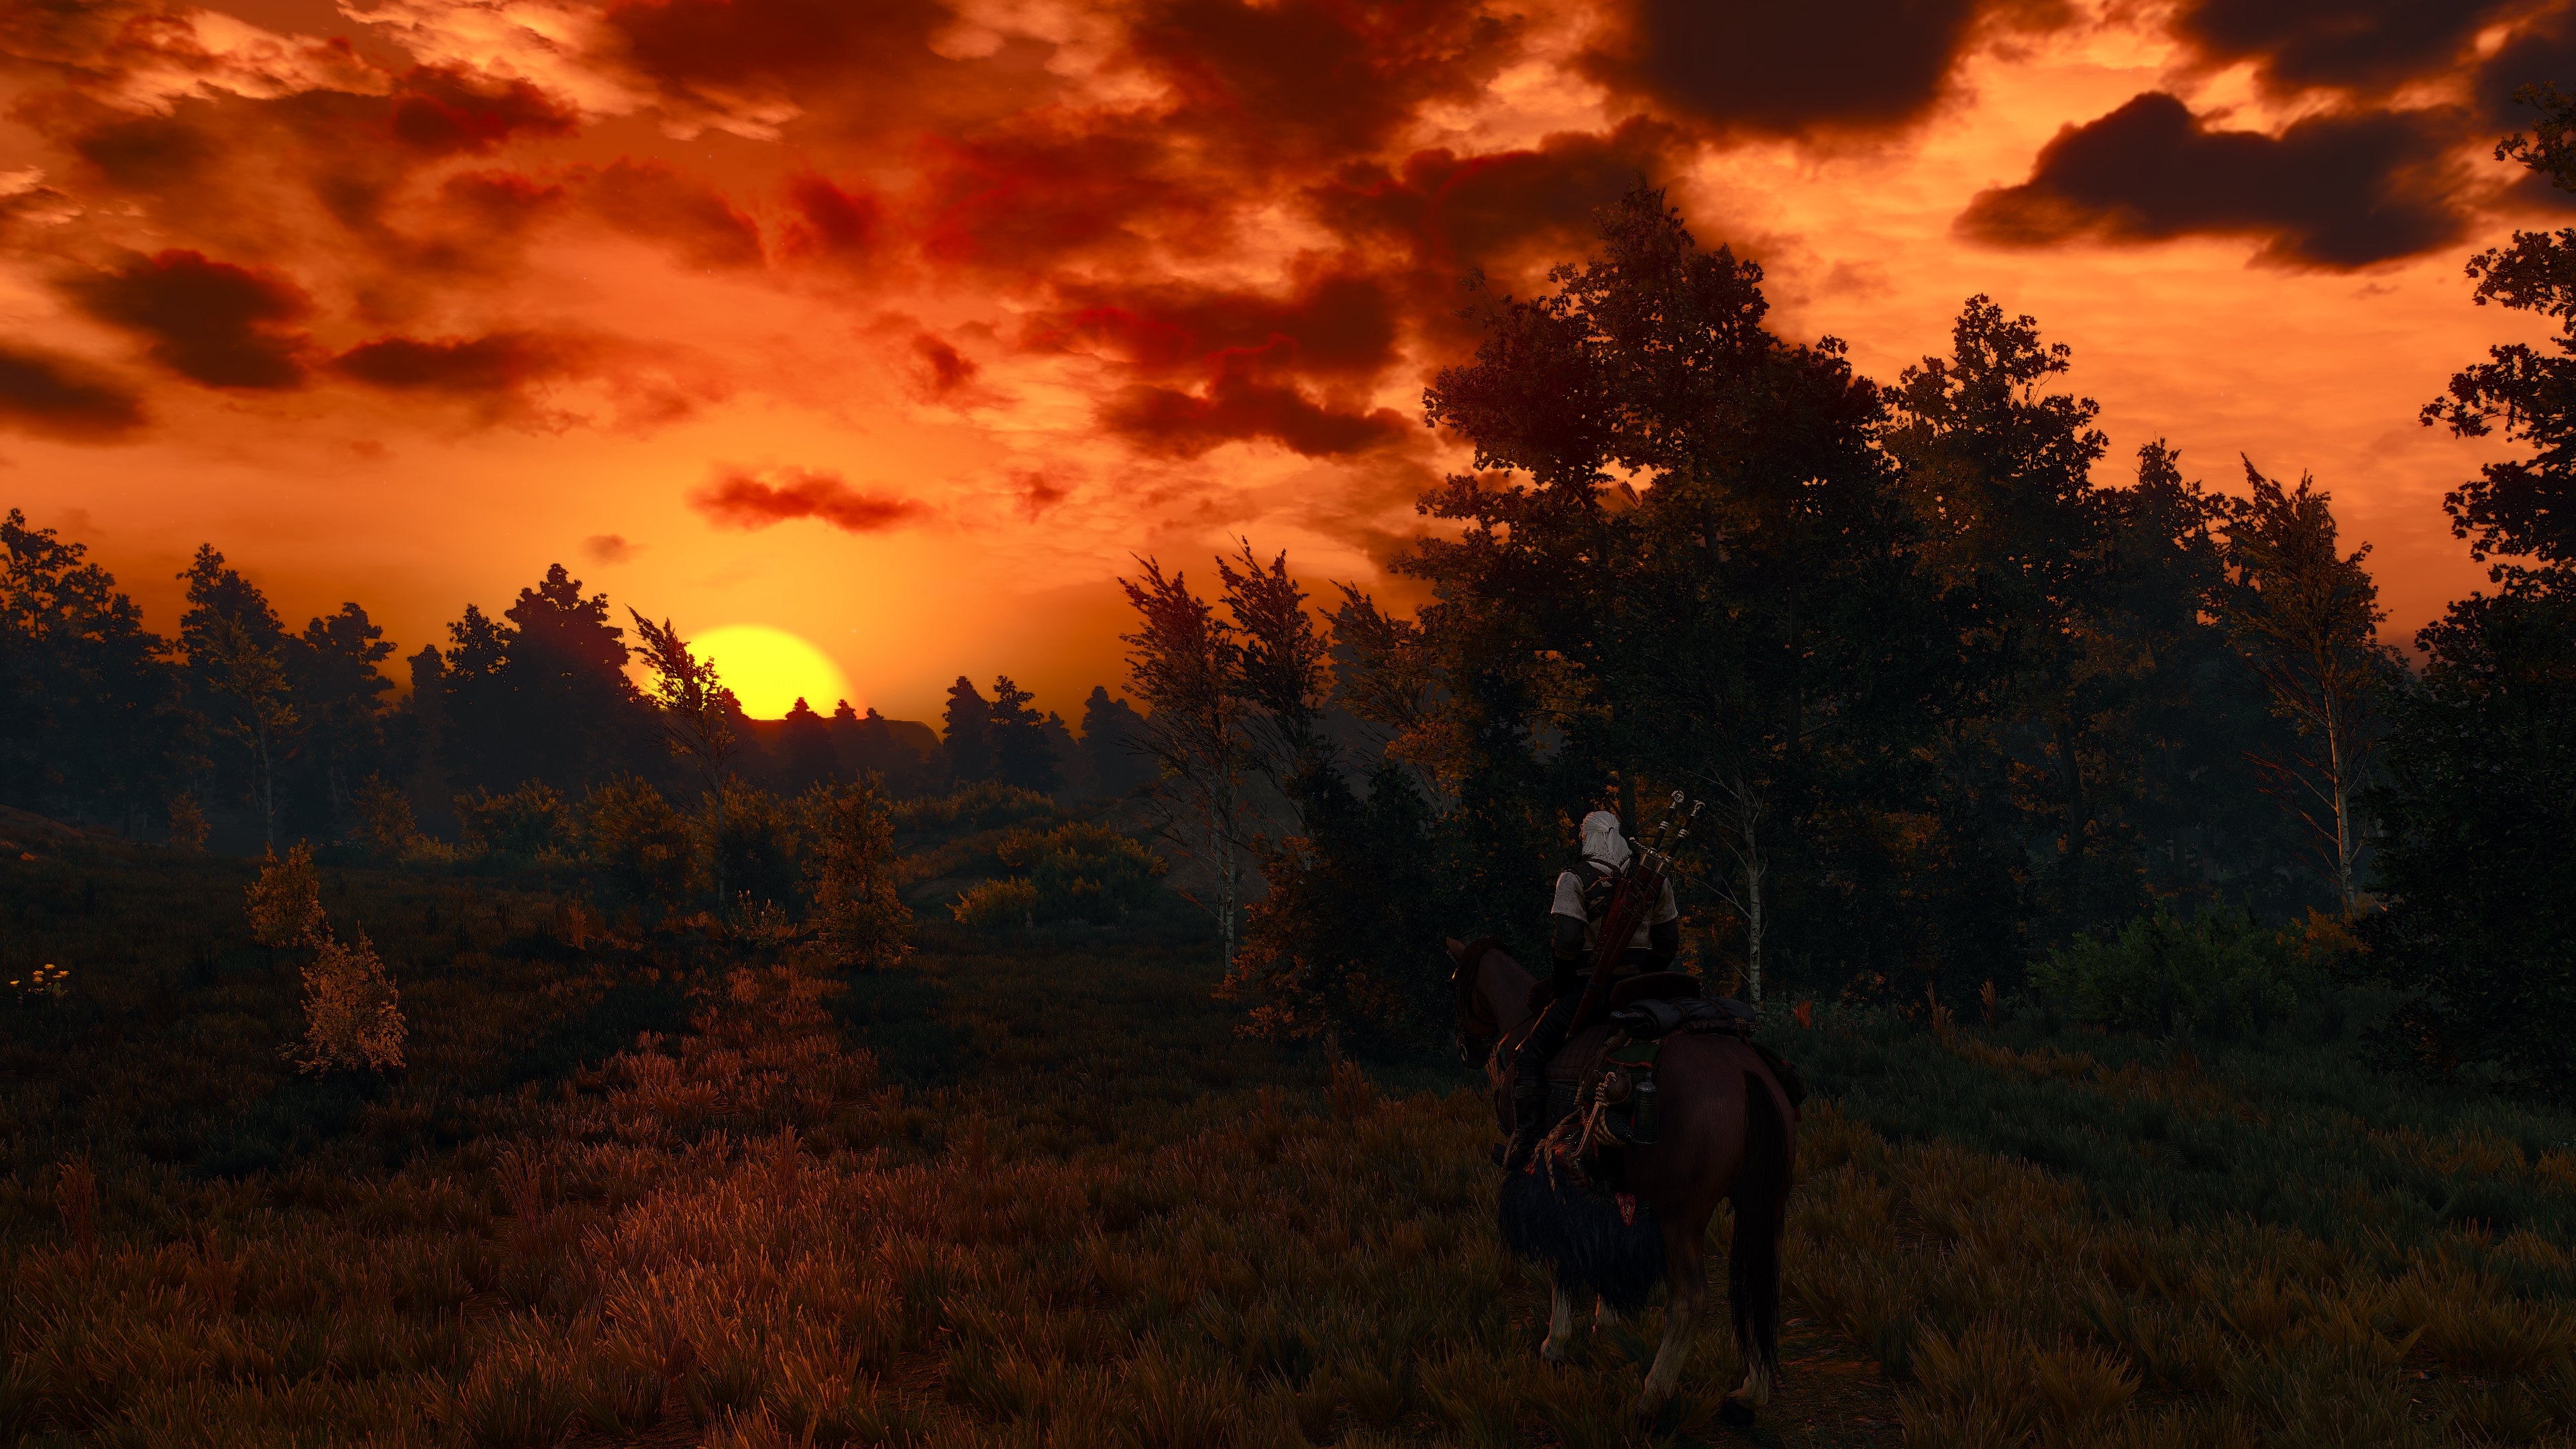 The Witcher The Witcher 3 Wild Hunt Geralt Of Rivia Screen Shot Roach 3840x2160